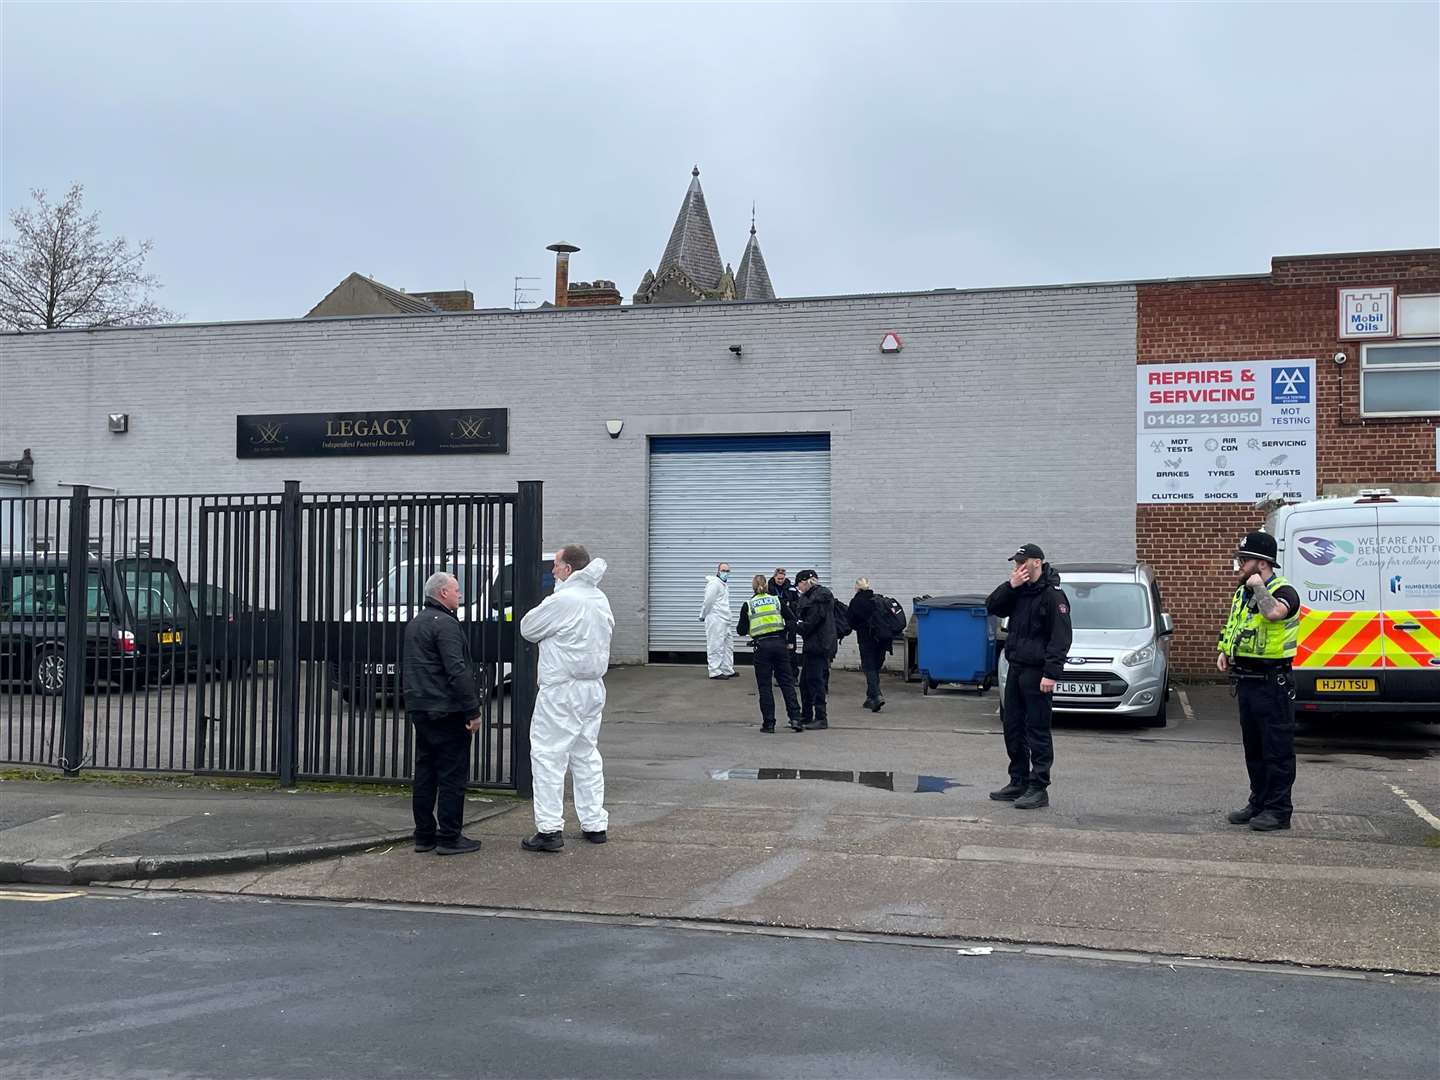 Humberside Police said detectives had been working ‘around the clock’ since concerns were raised about Legacy Independent Funeral Directors in Hull (Dave Higgens/PA)